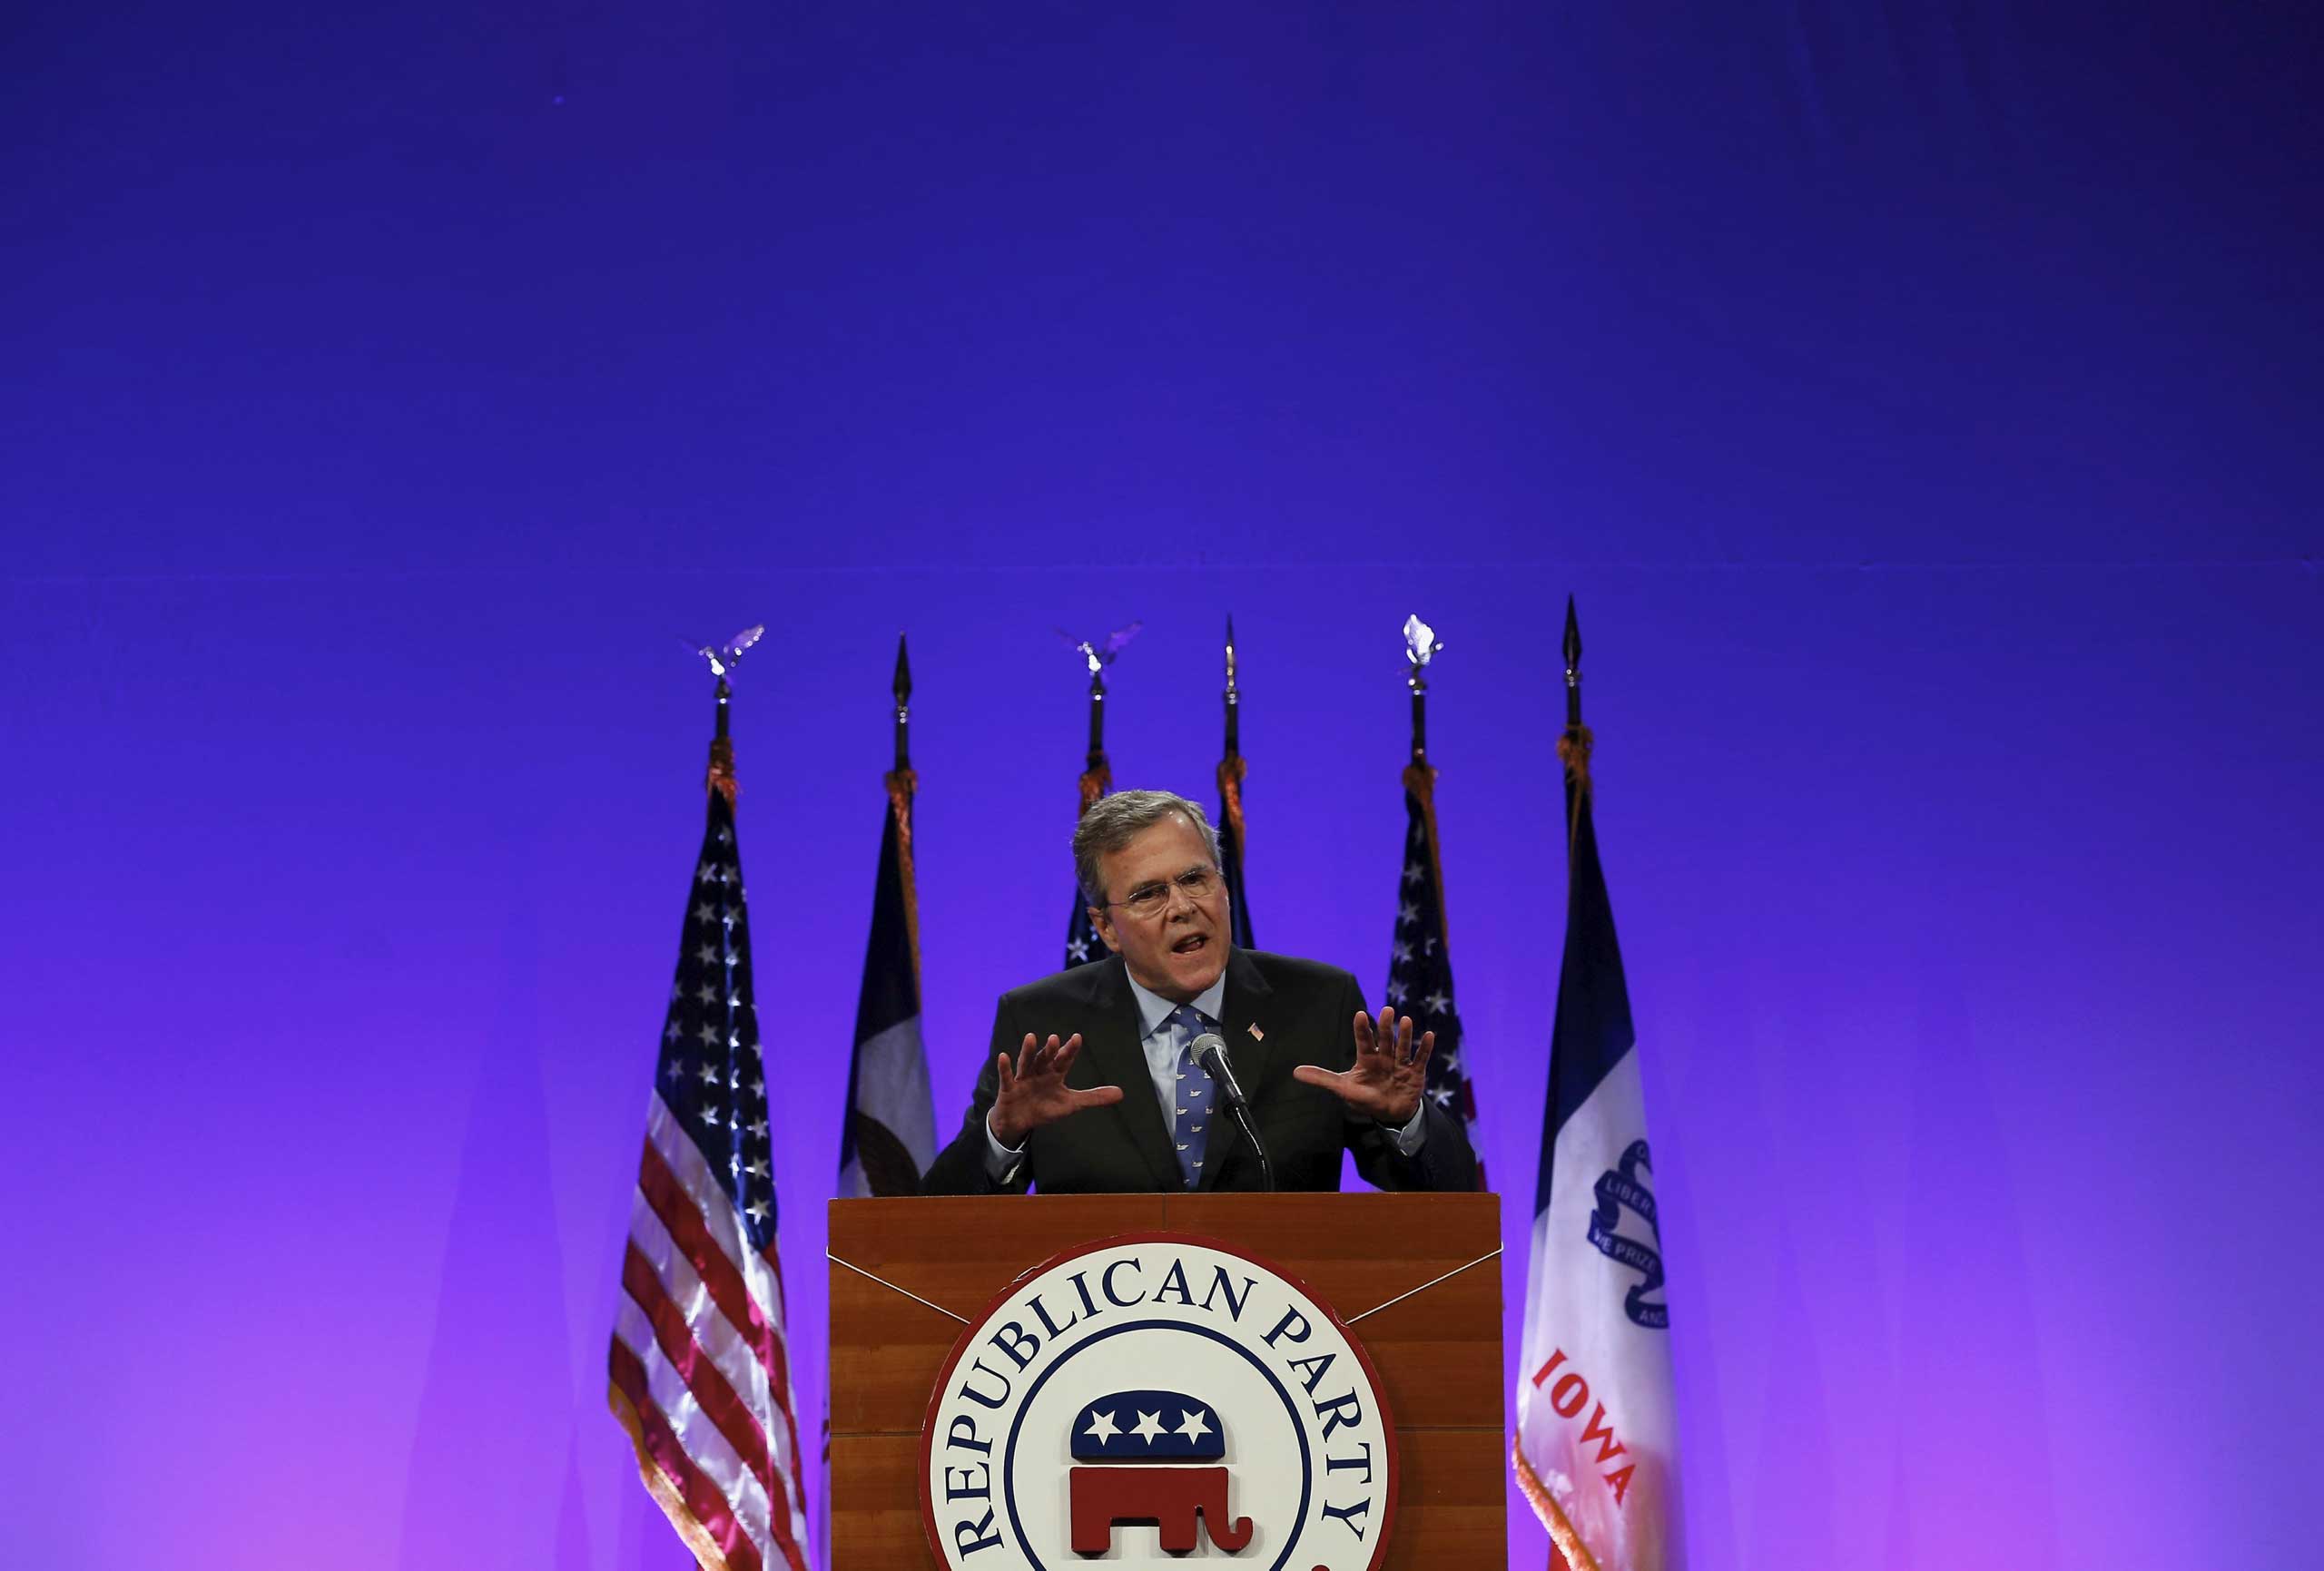 Former Florida Governor Jeb Bush speaks at the Republican Party of Iowa's Lincoln Dinner in Des Moines, Iowa, United States, May 16, 2015. (Jim Young—Reuters)